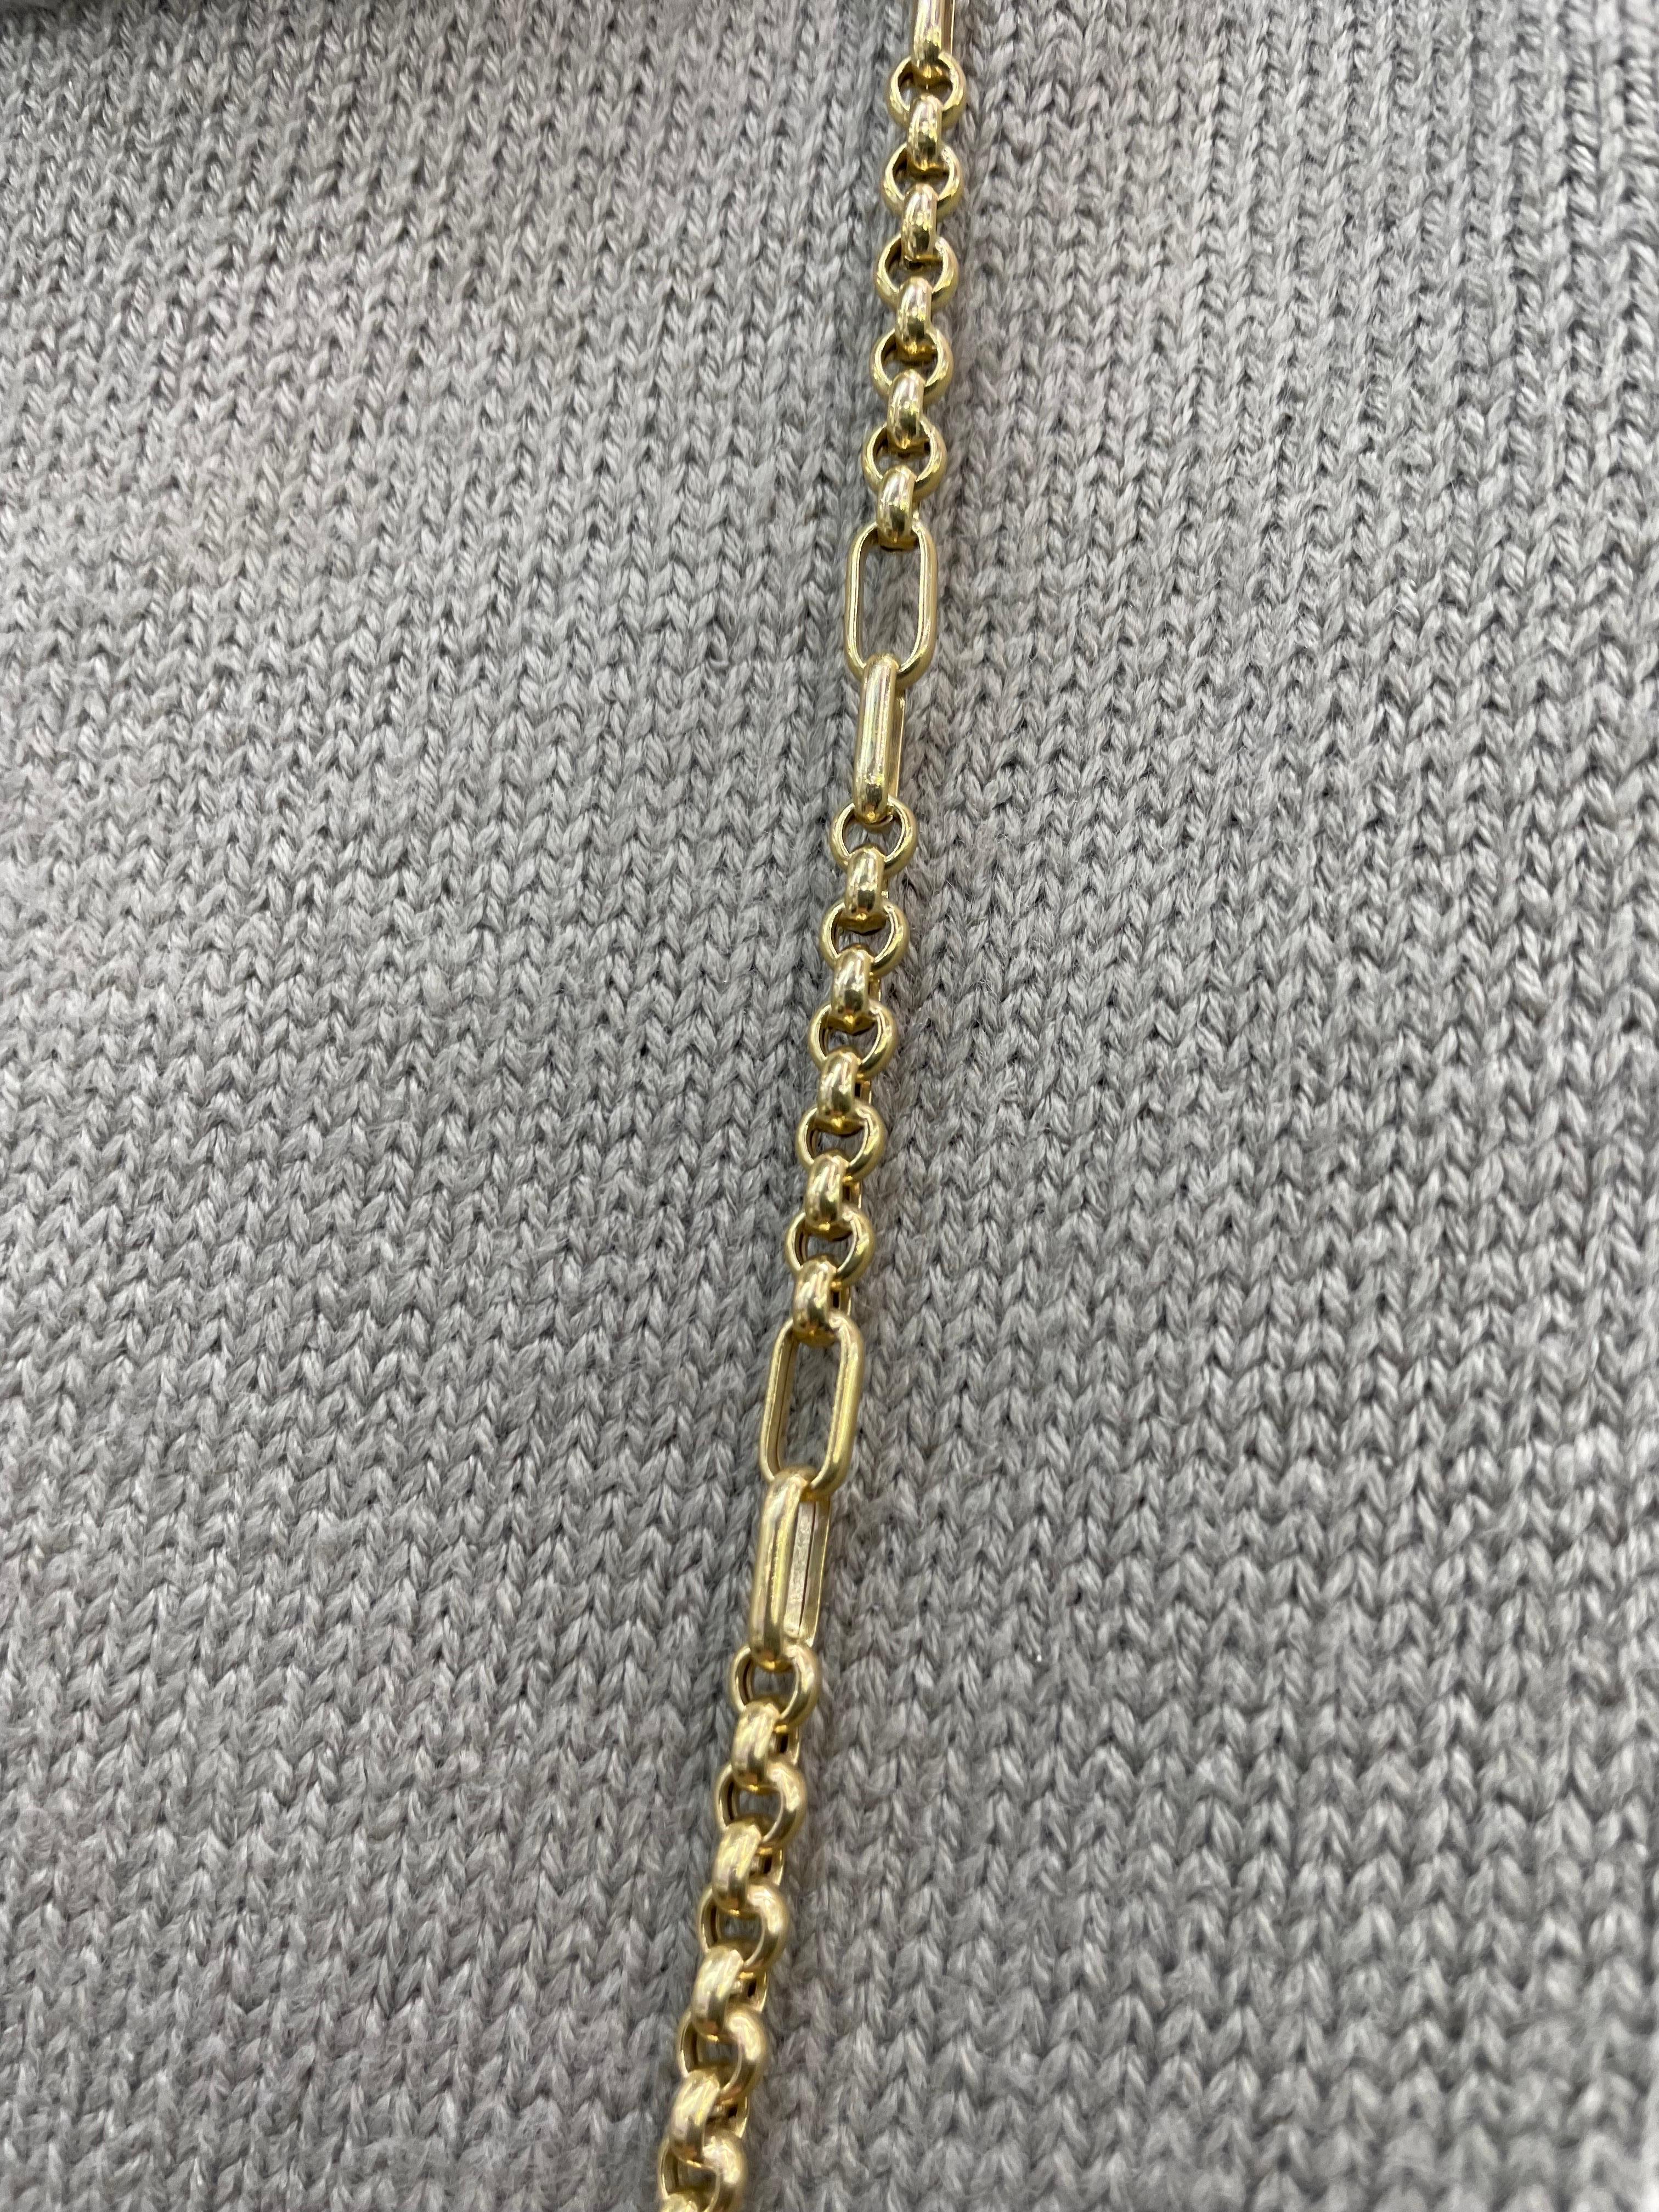 14 Karat Yellow Gold Link Necklace 25.6 Grams 36.5 Inches For Sale 3